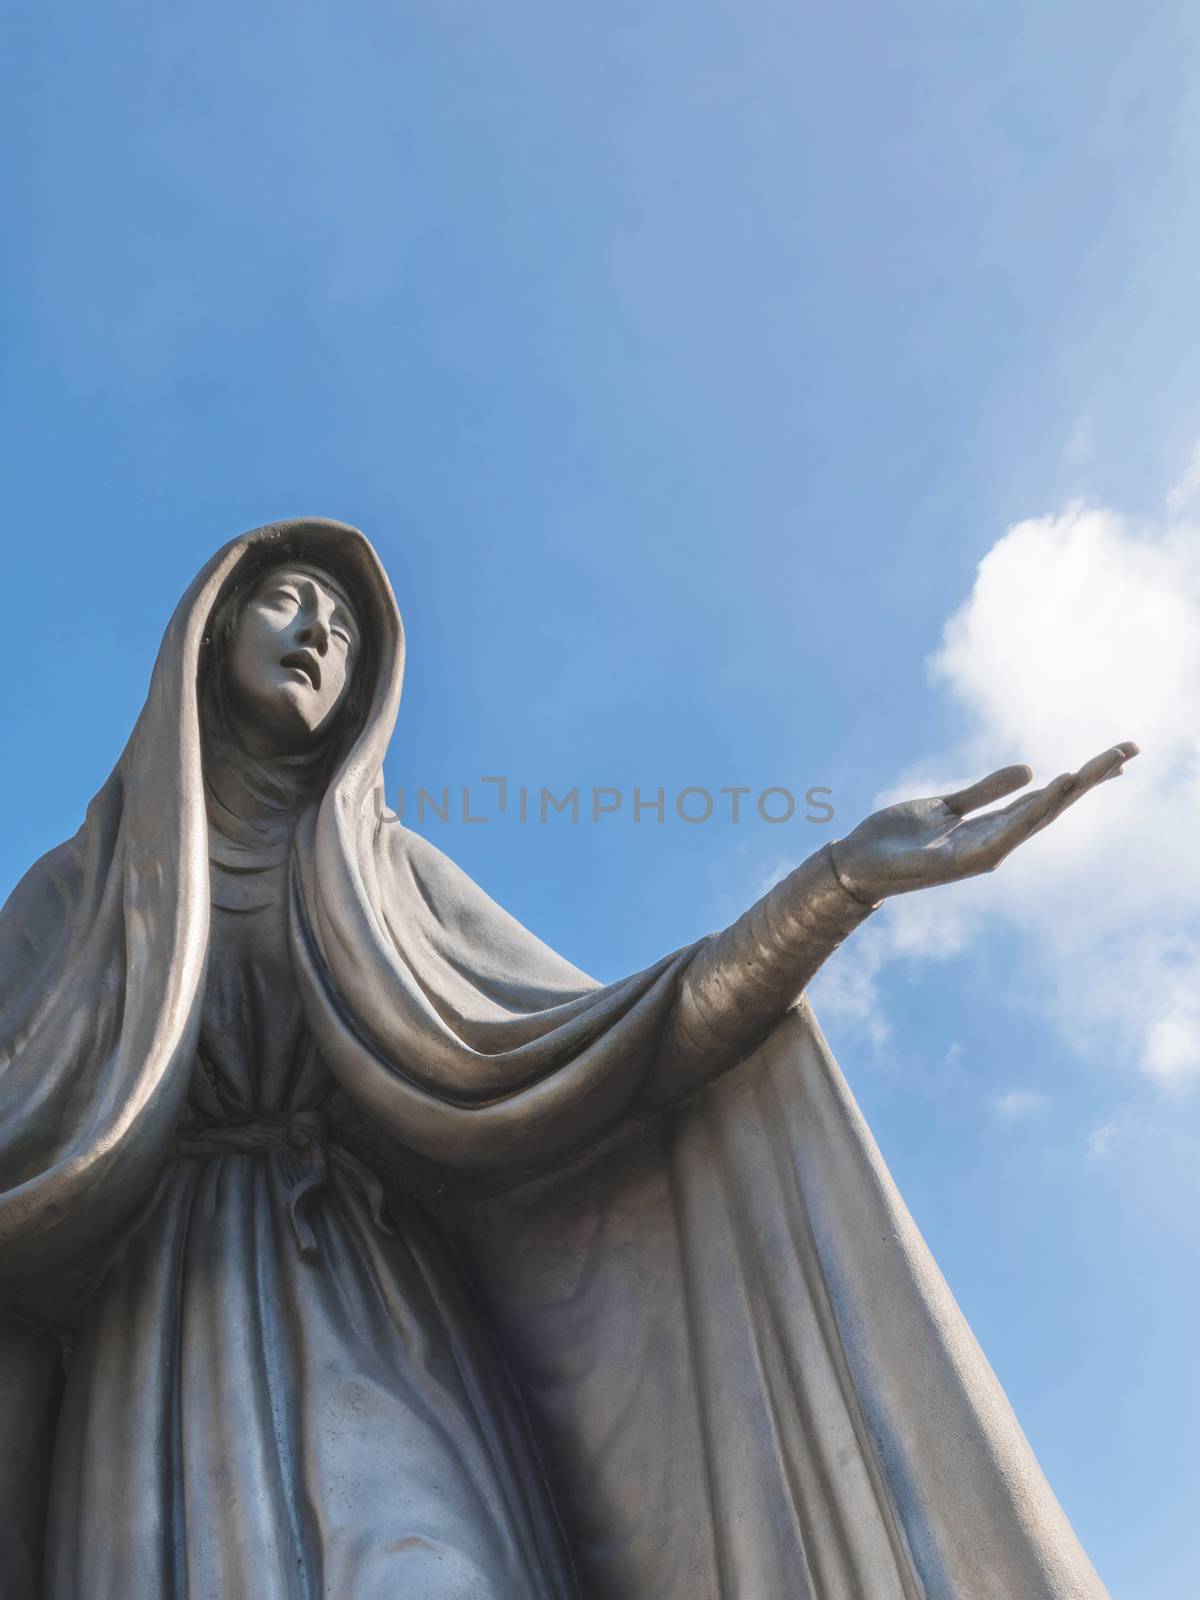 Statue of Virgin Mary. Our Lady of Fatima. Copy space on sky.